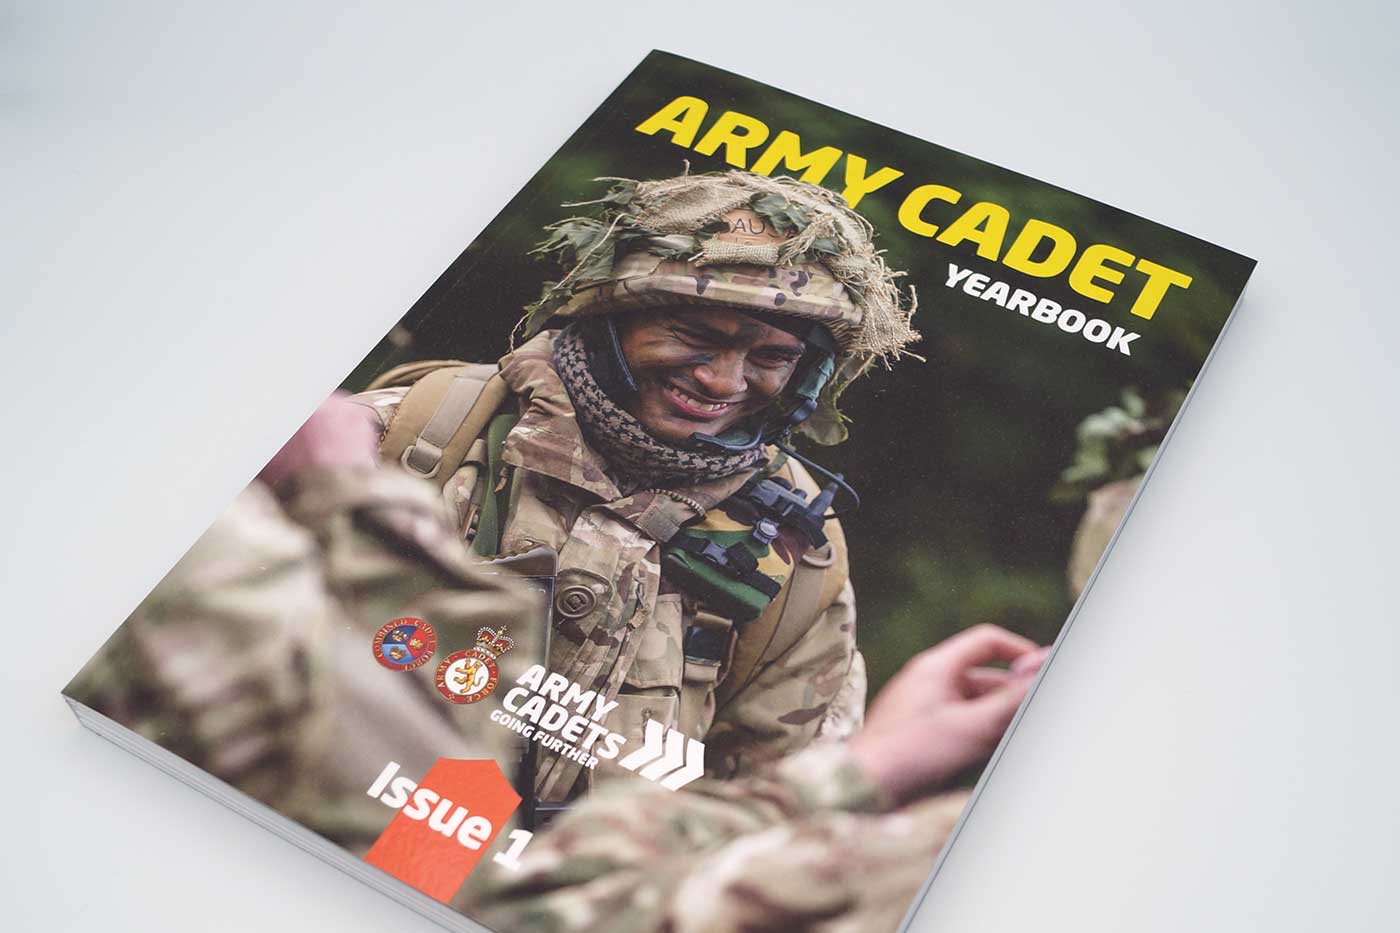 Army Cadet Yearbook